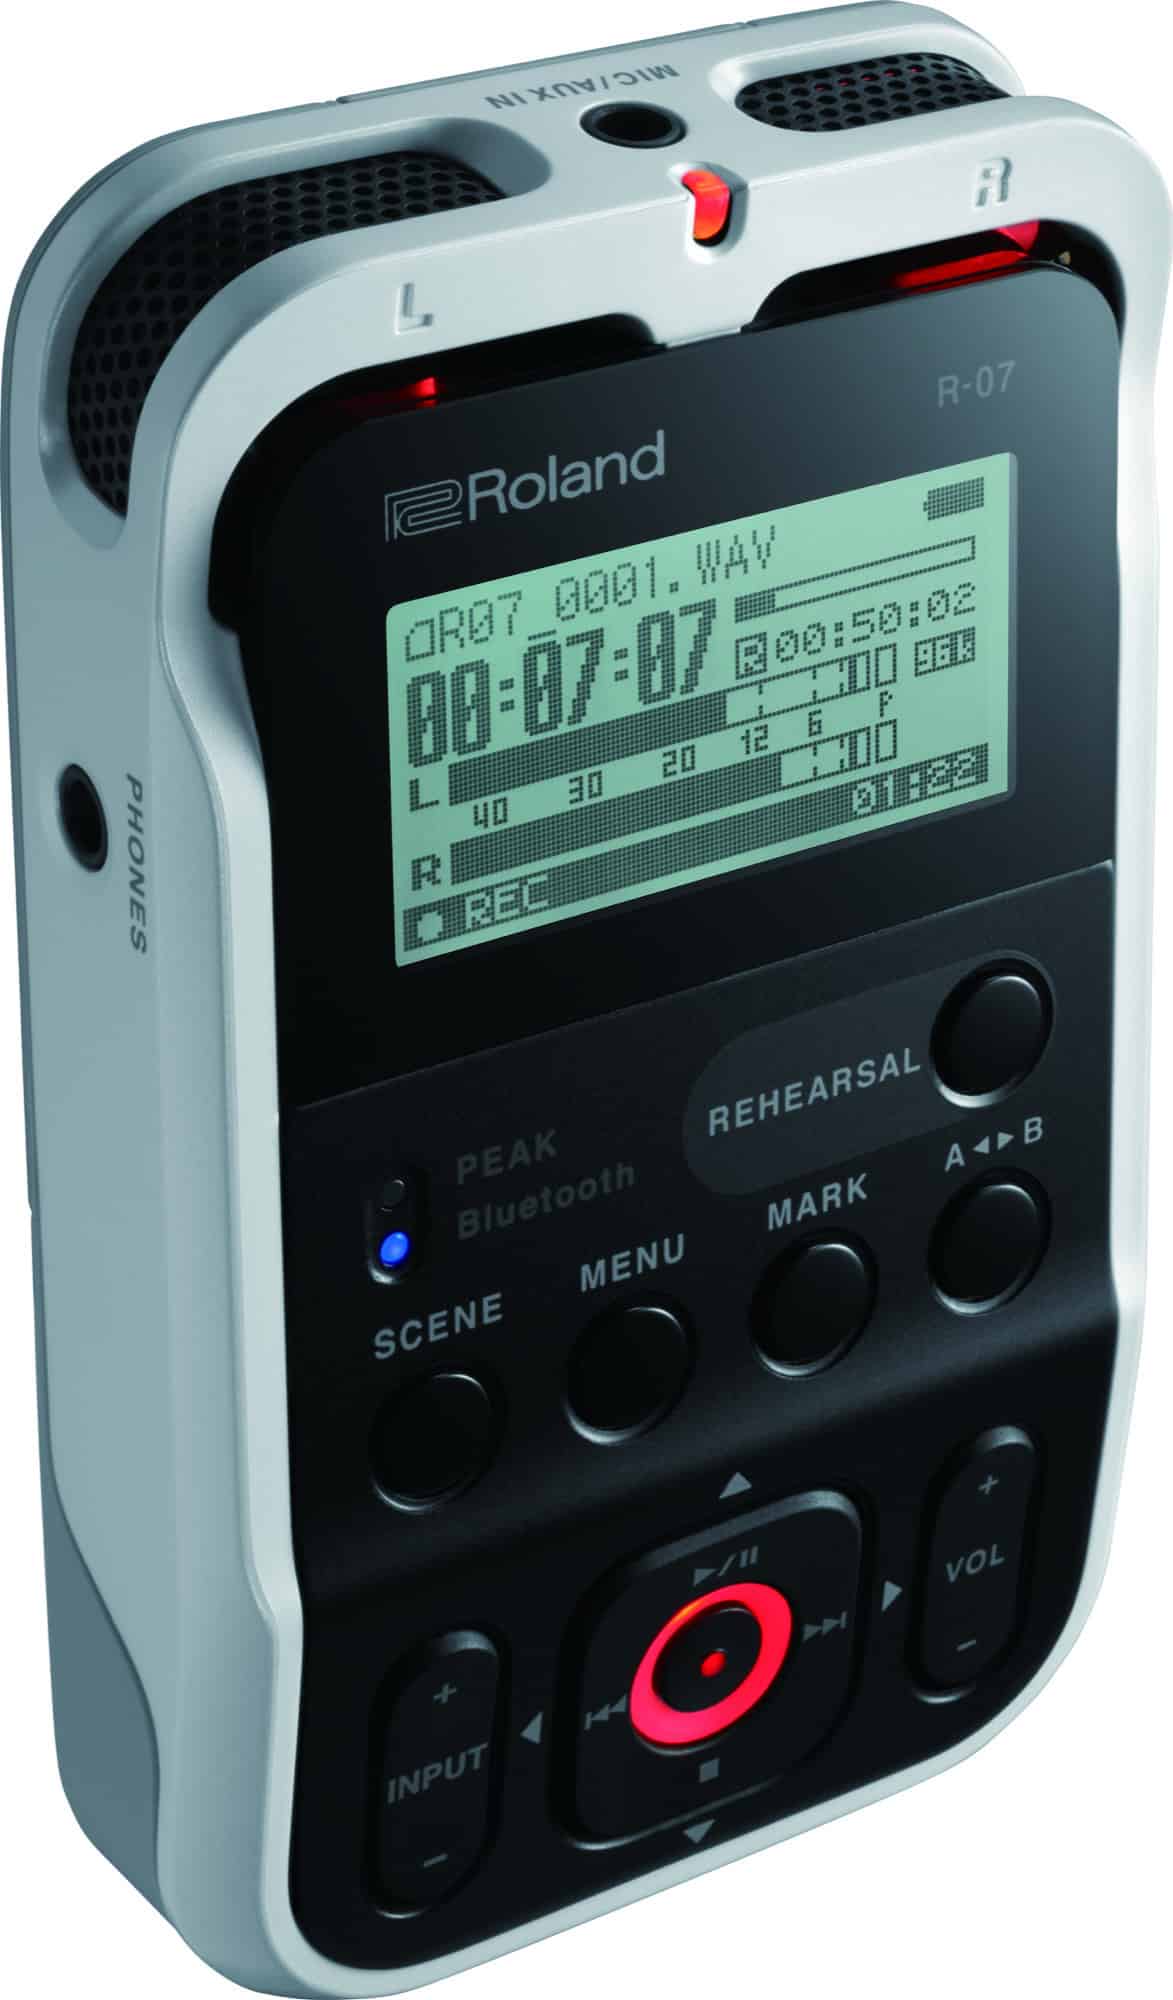 The Roland R-07 recorder even looks super-cool.